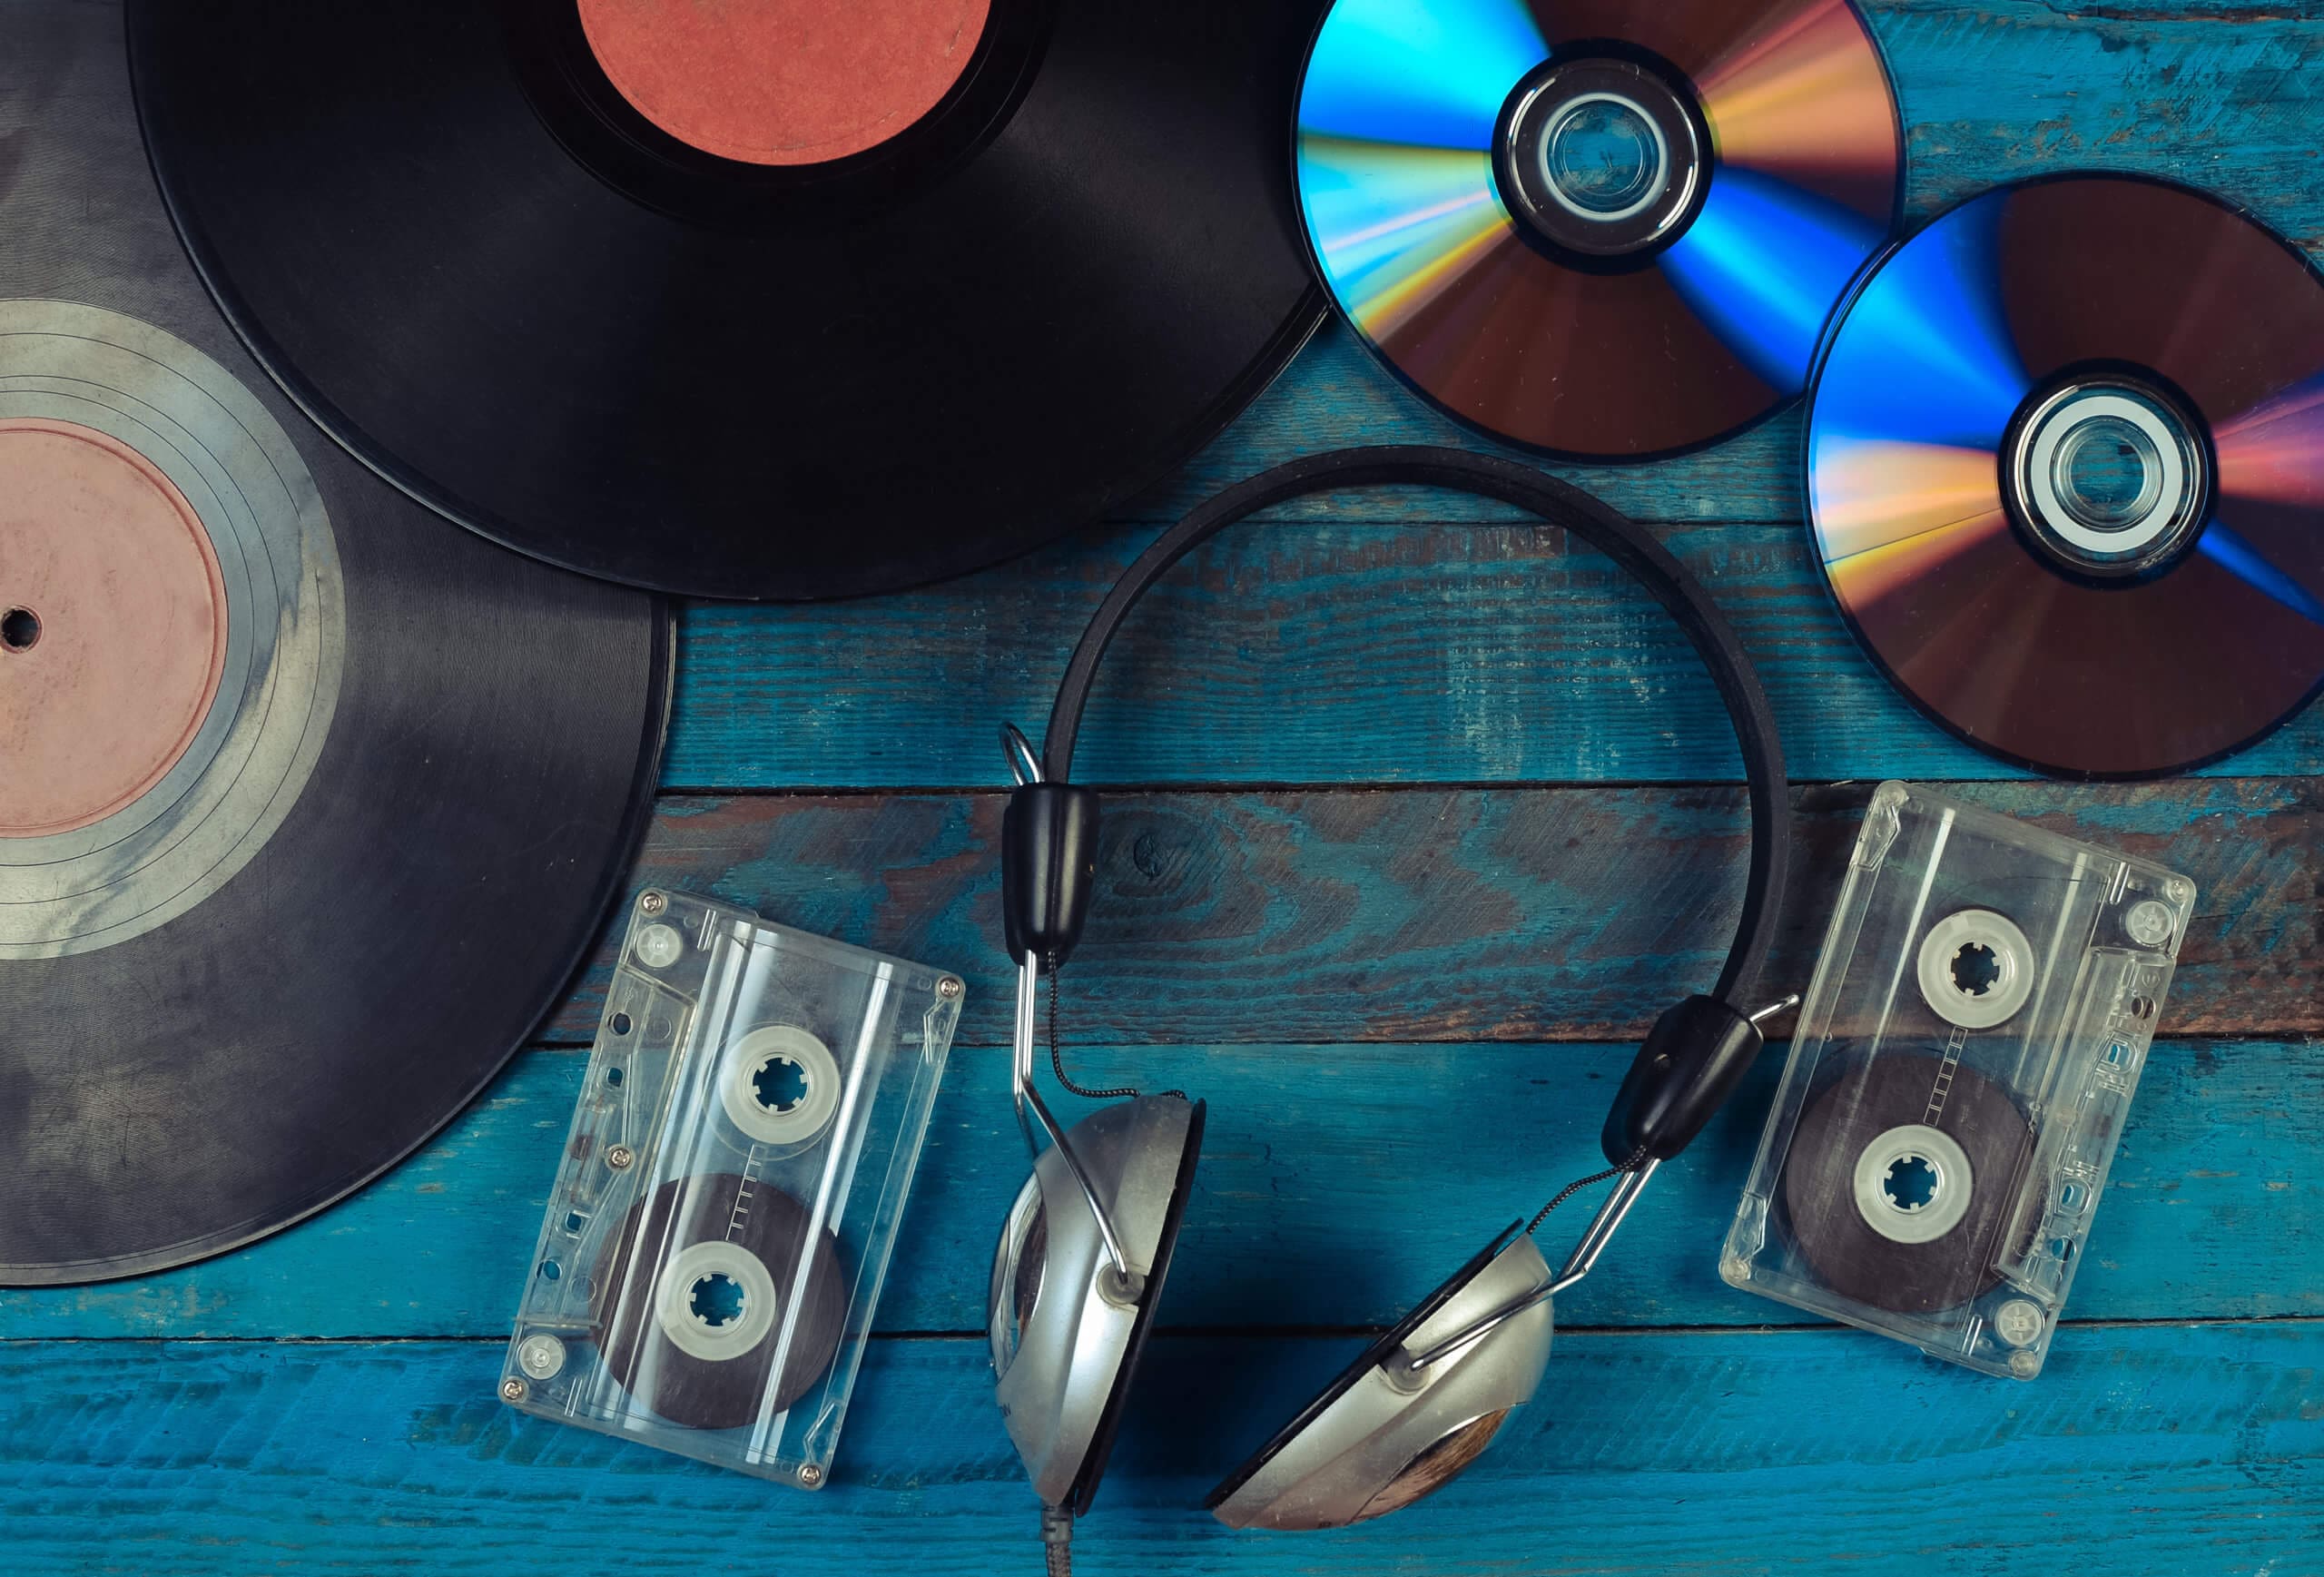 What’s the Best Medium for Music Vinyl, CDs, or Streaming Services?